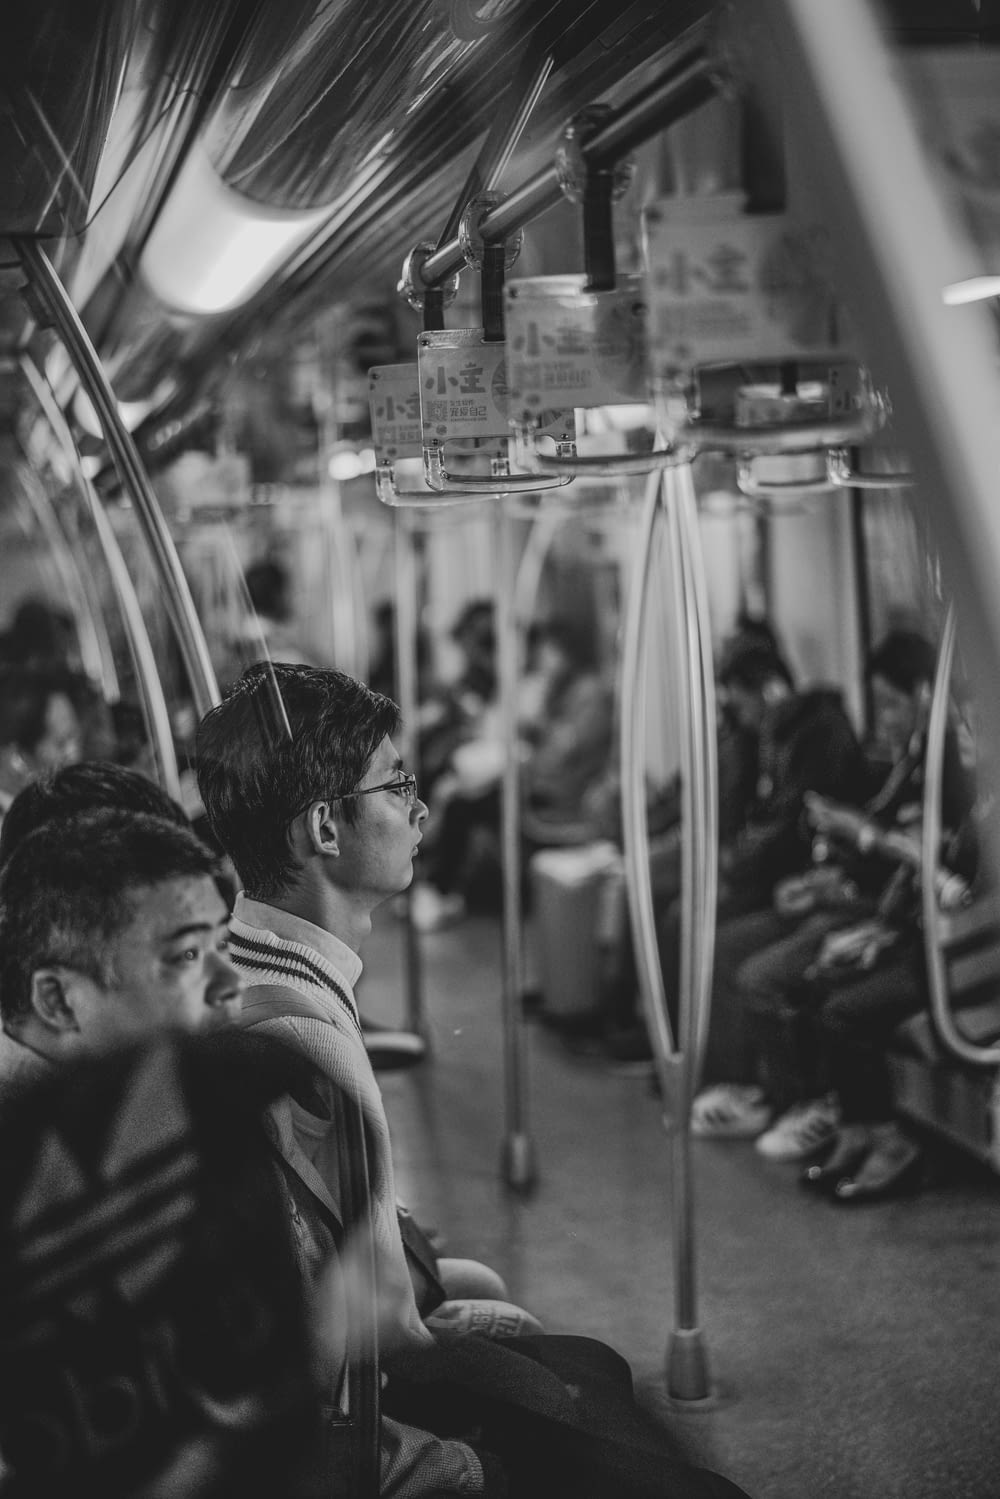 grayscale photography of people inside train